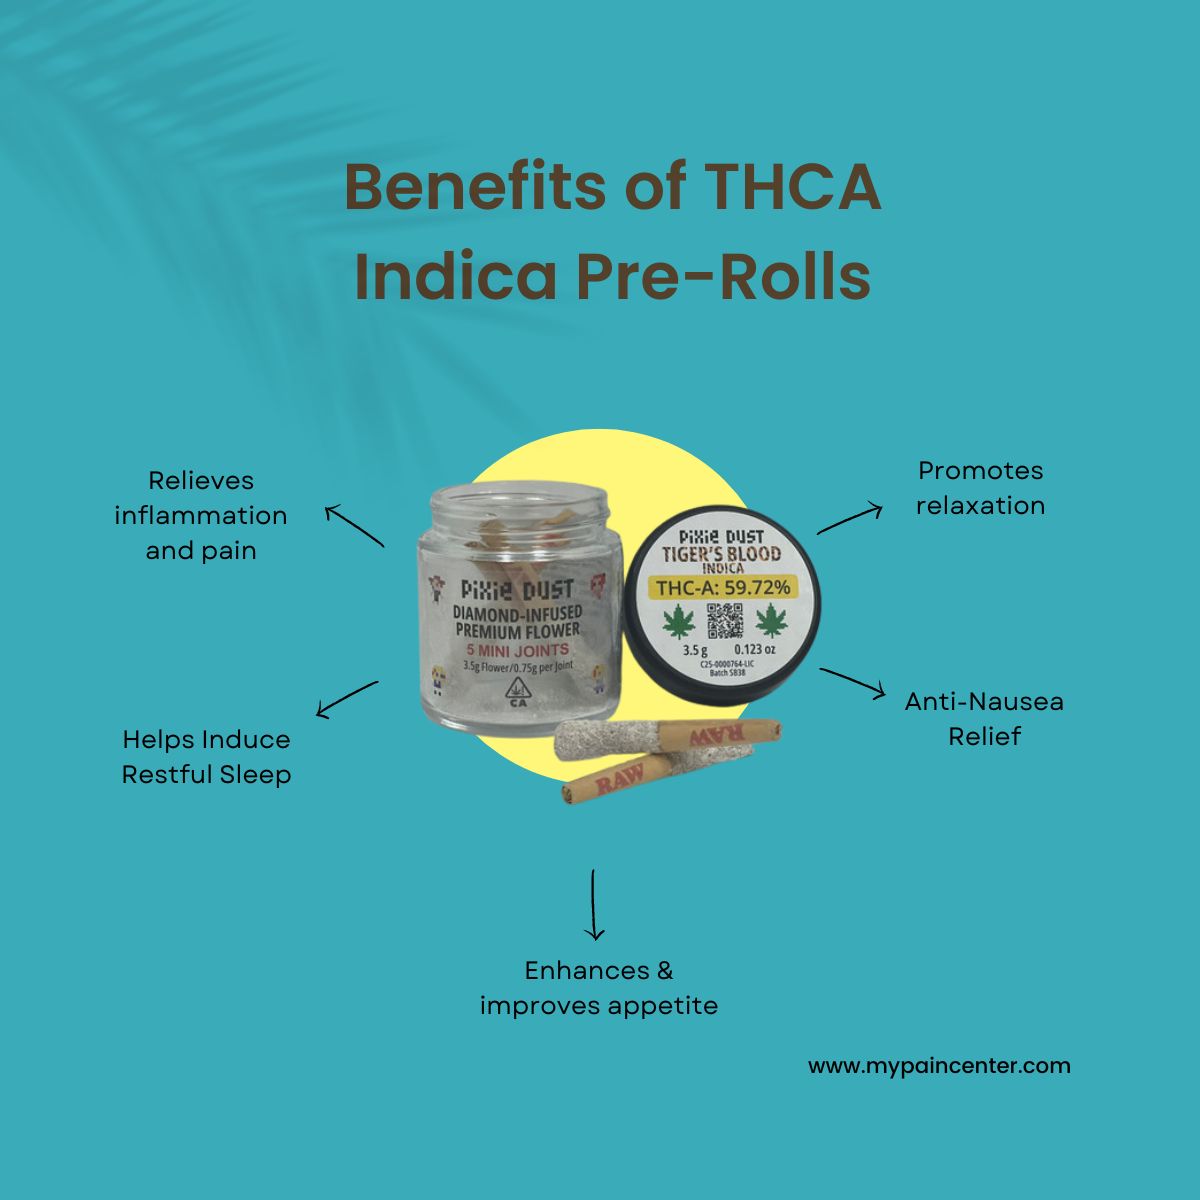 Benefits of pre-roll THCA indica.